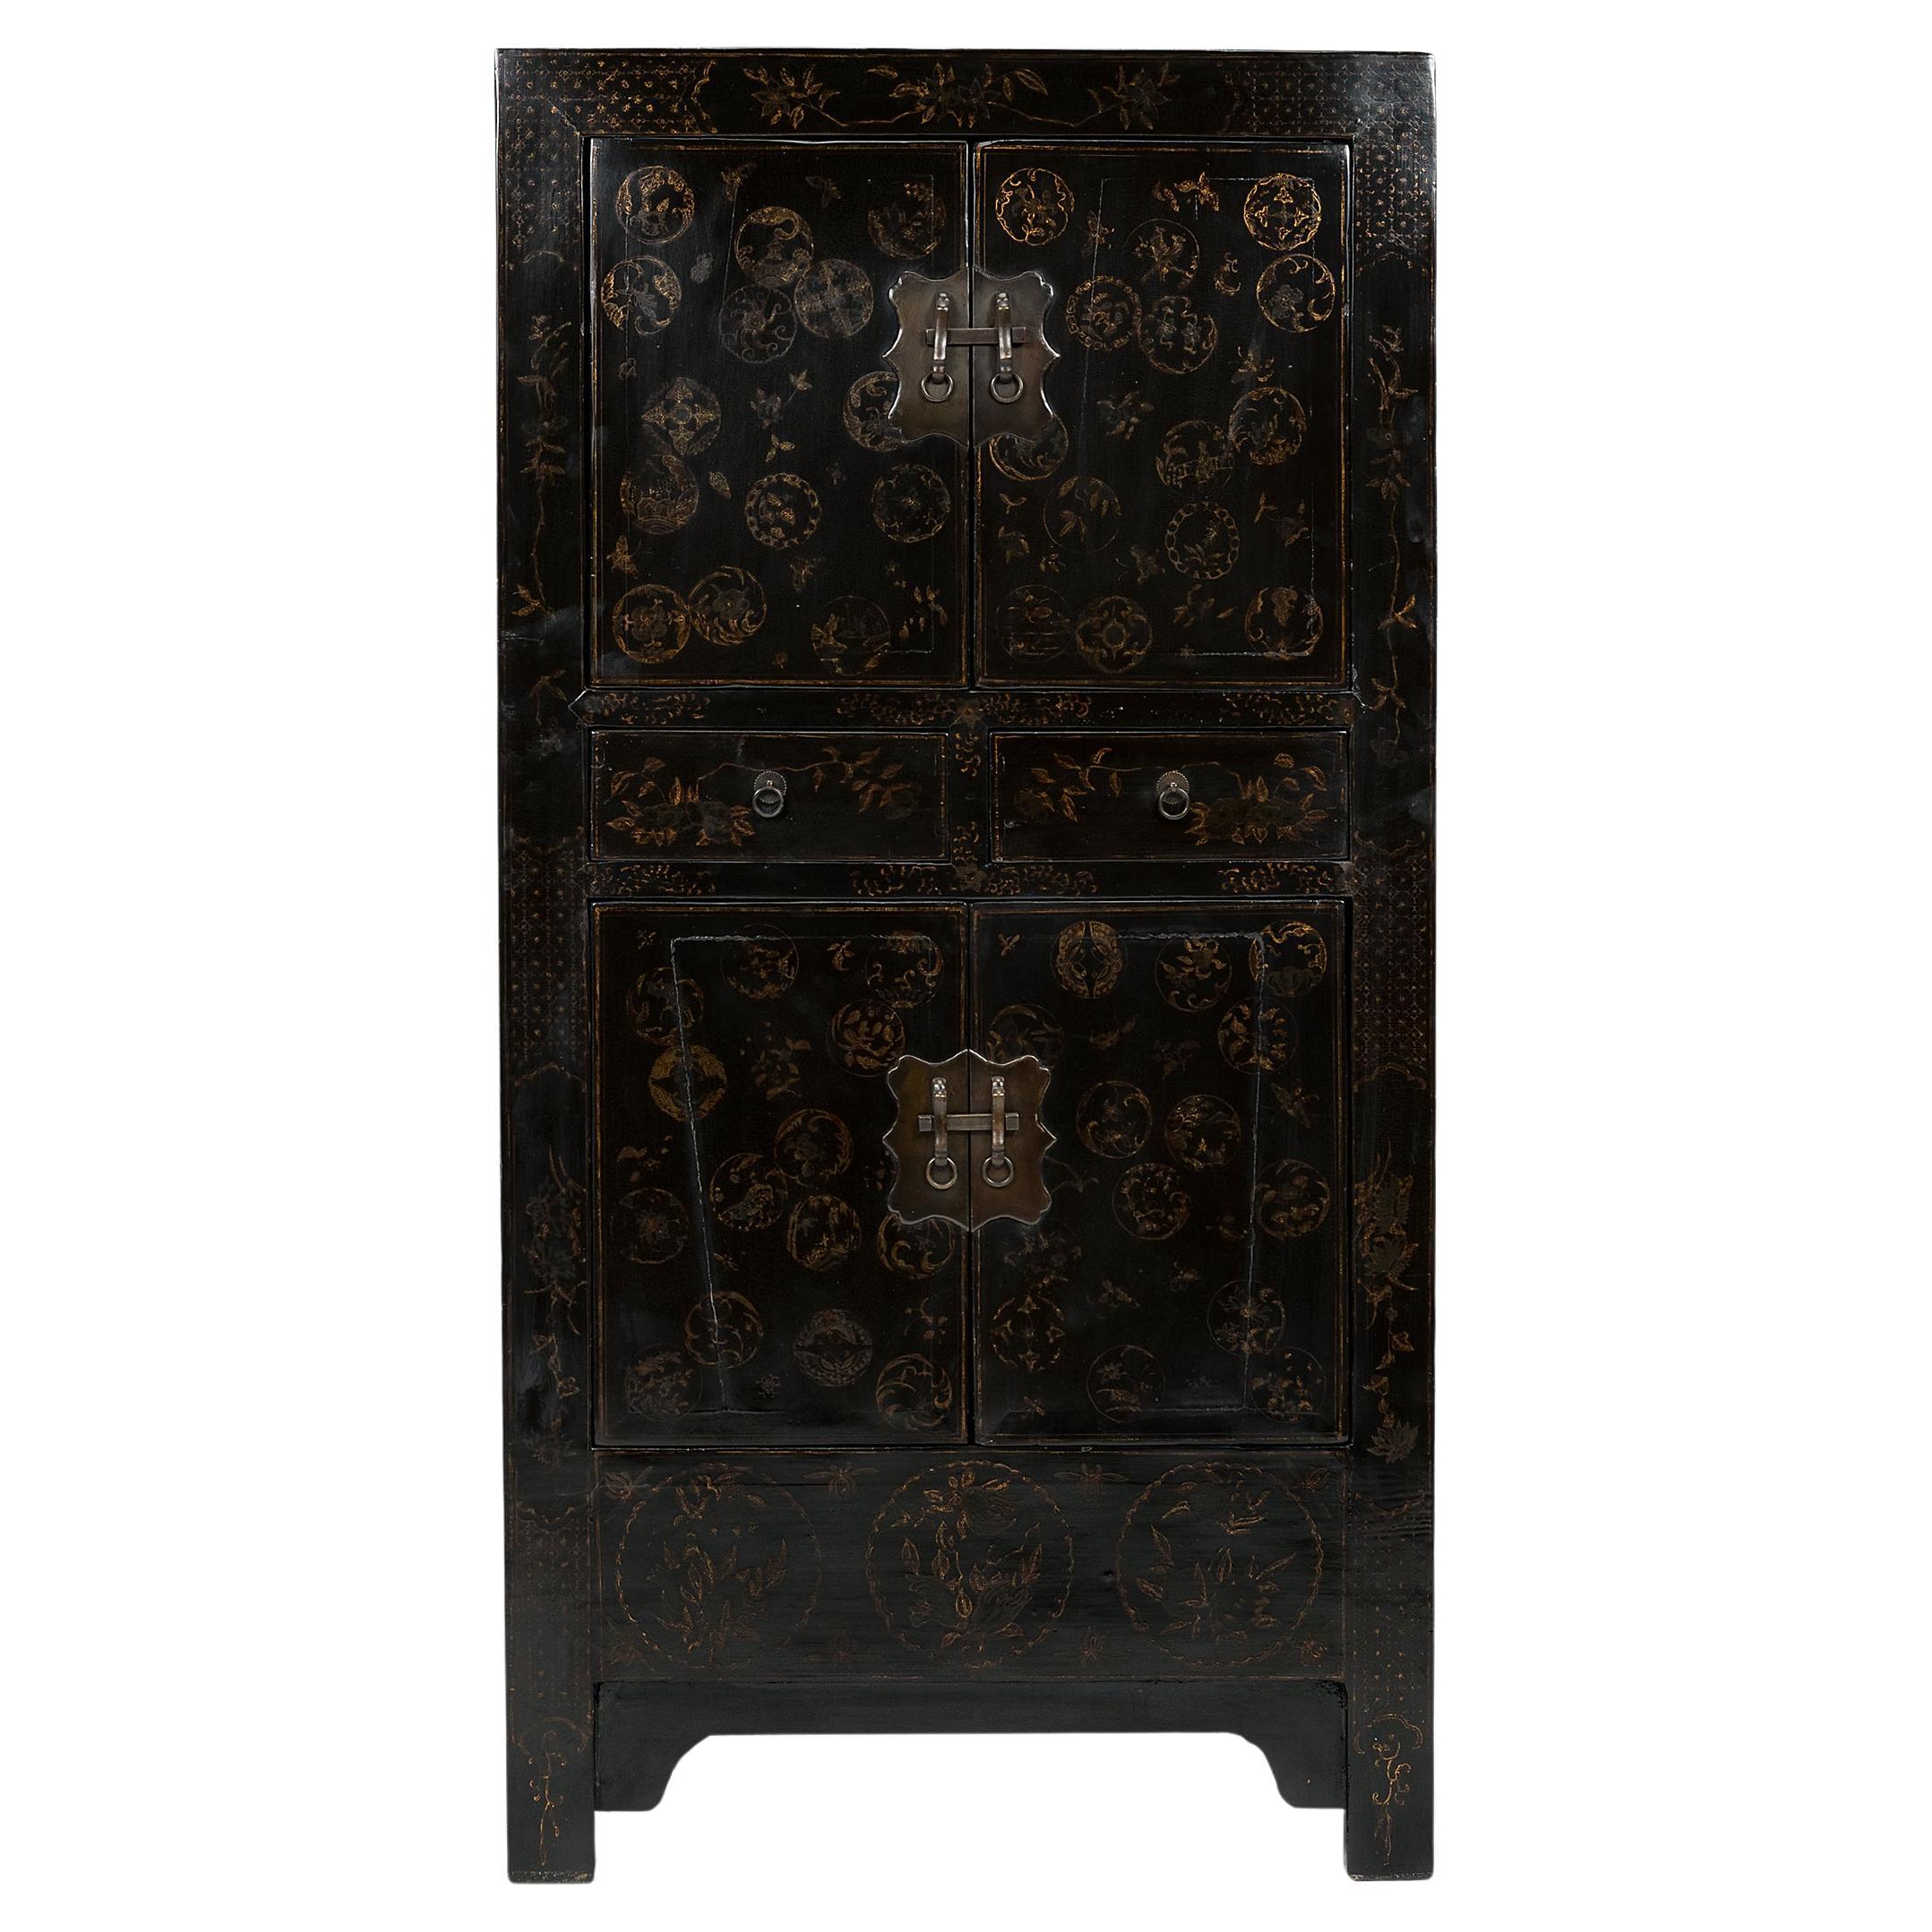 Chinese Gilt Black Lacquer Shanxi Cabinet, c. 1850 For Sale